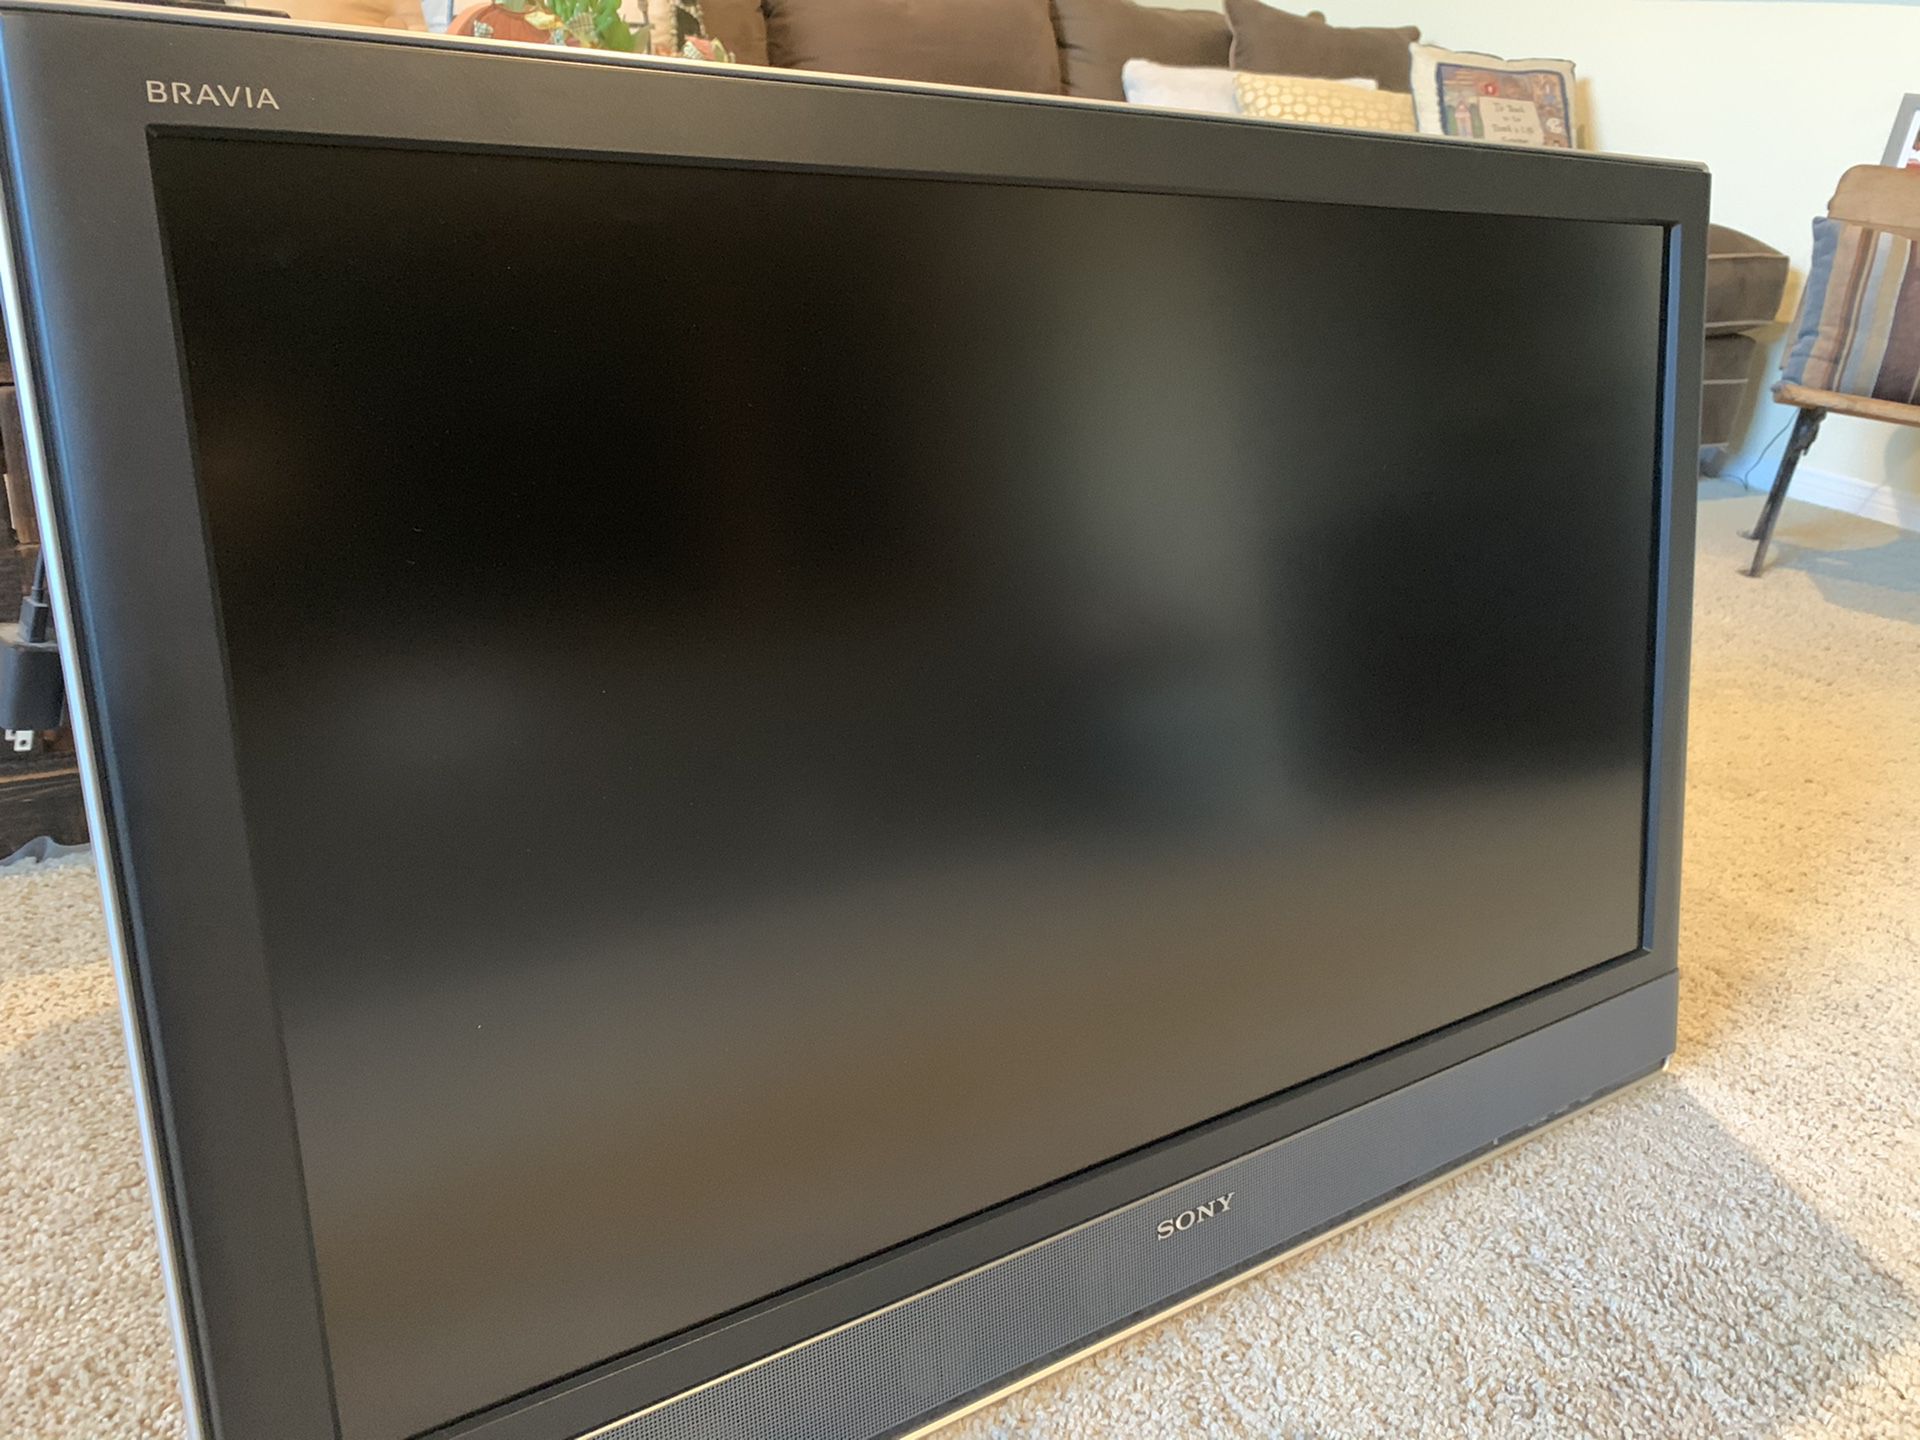 Sony 40 inch flat screen TV. 1080p Model KDL 40v2500. In perfect condition